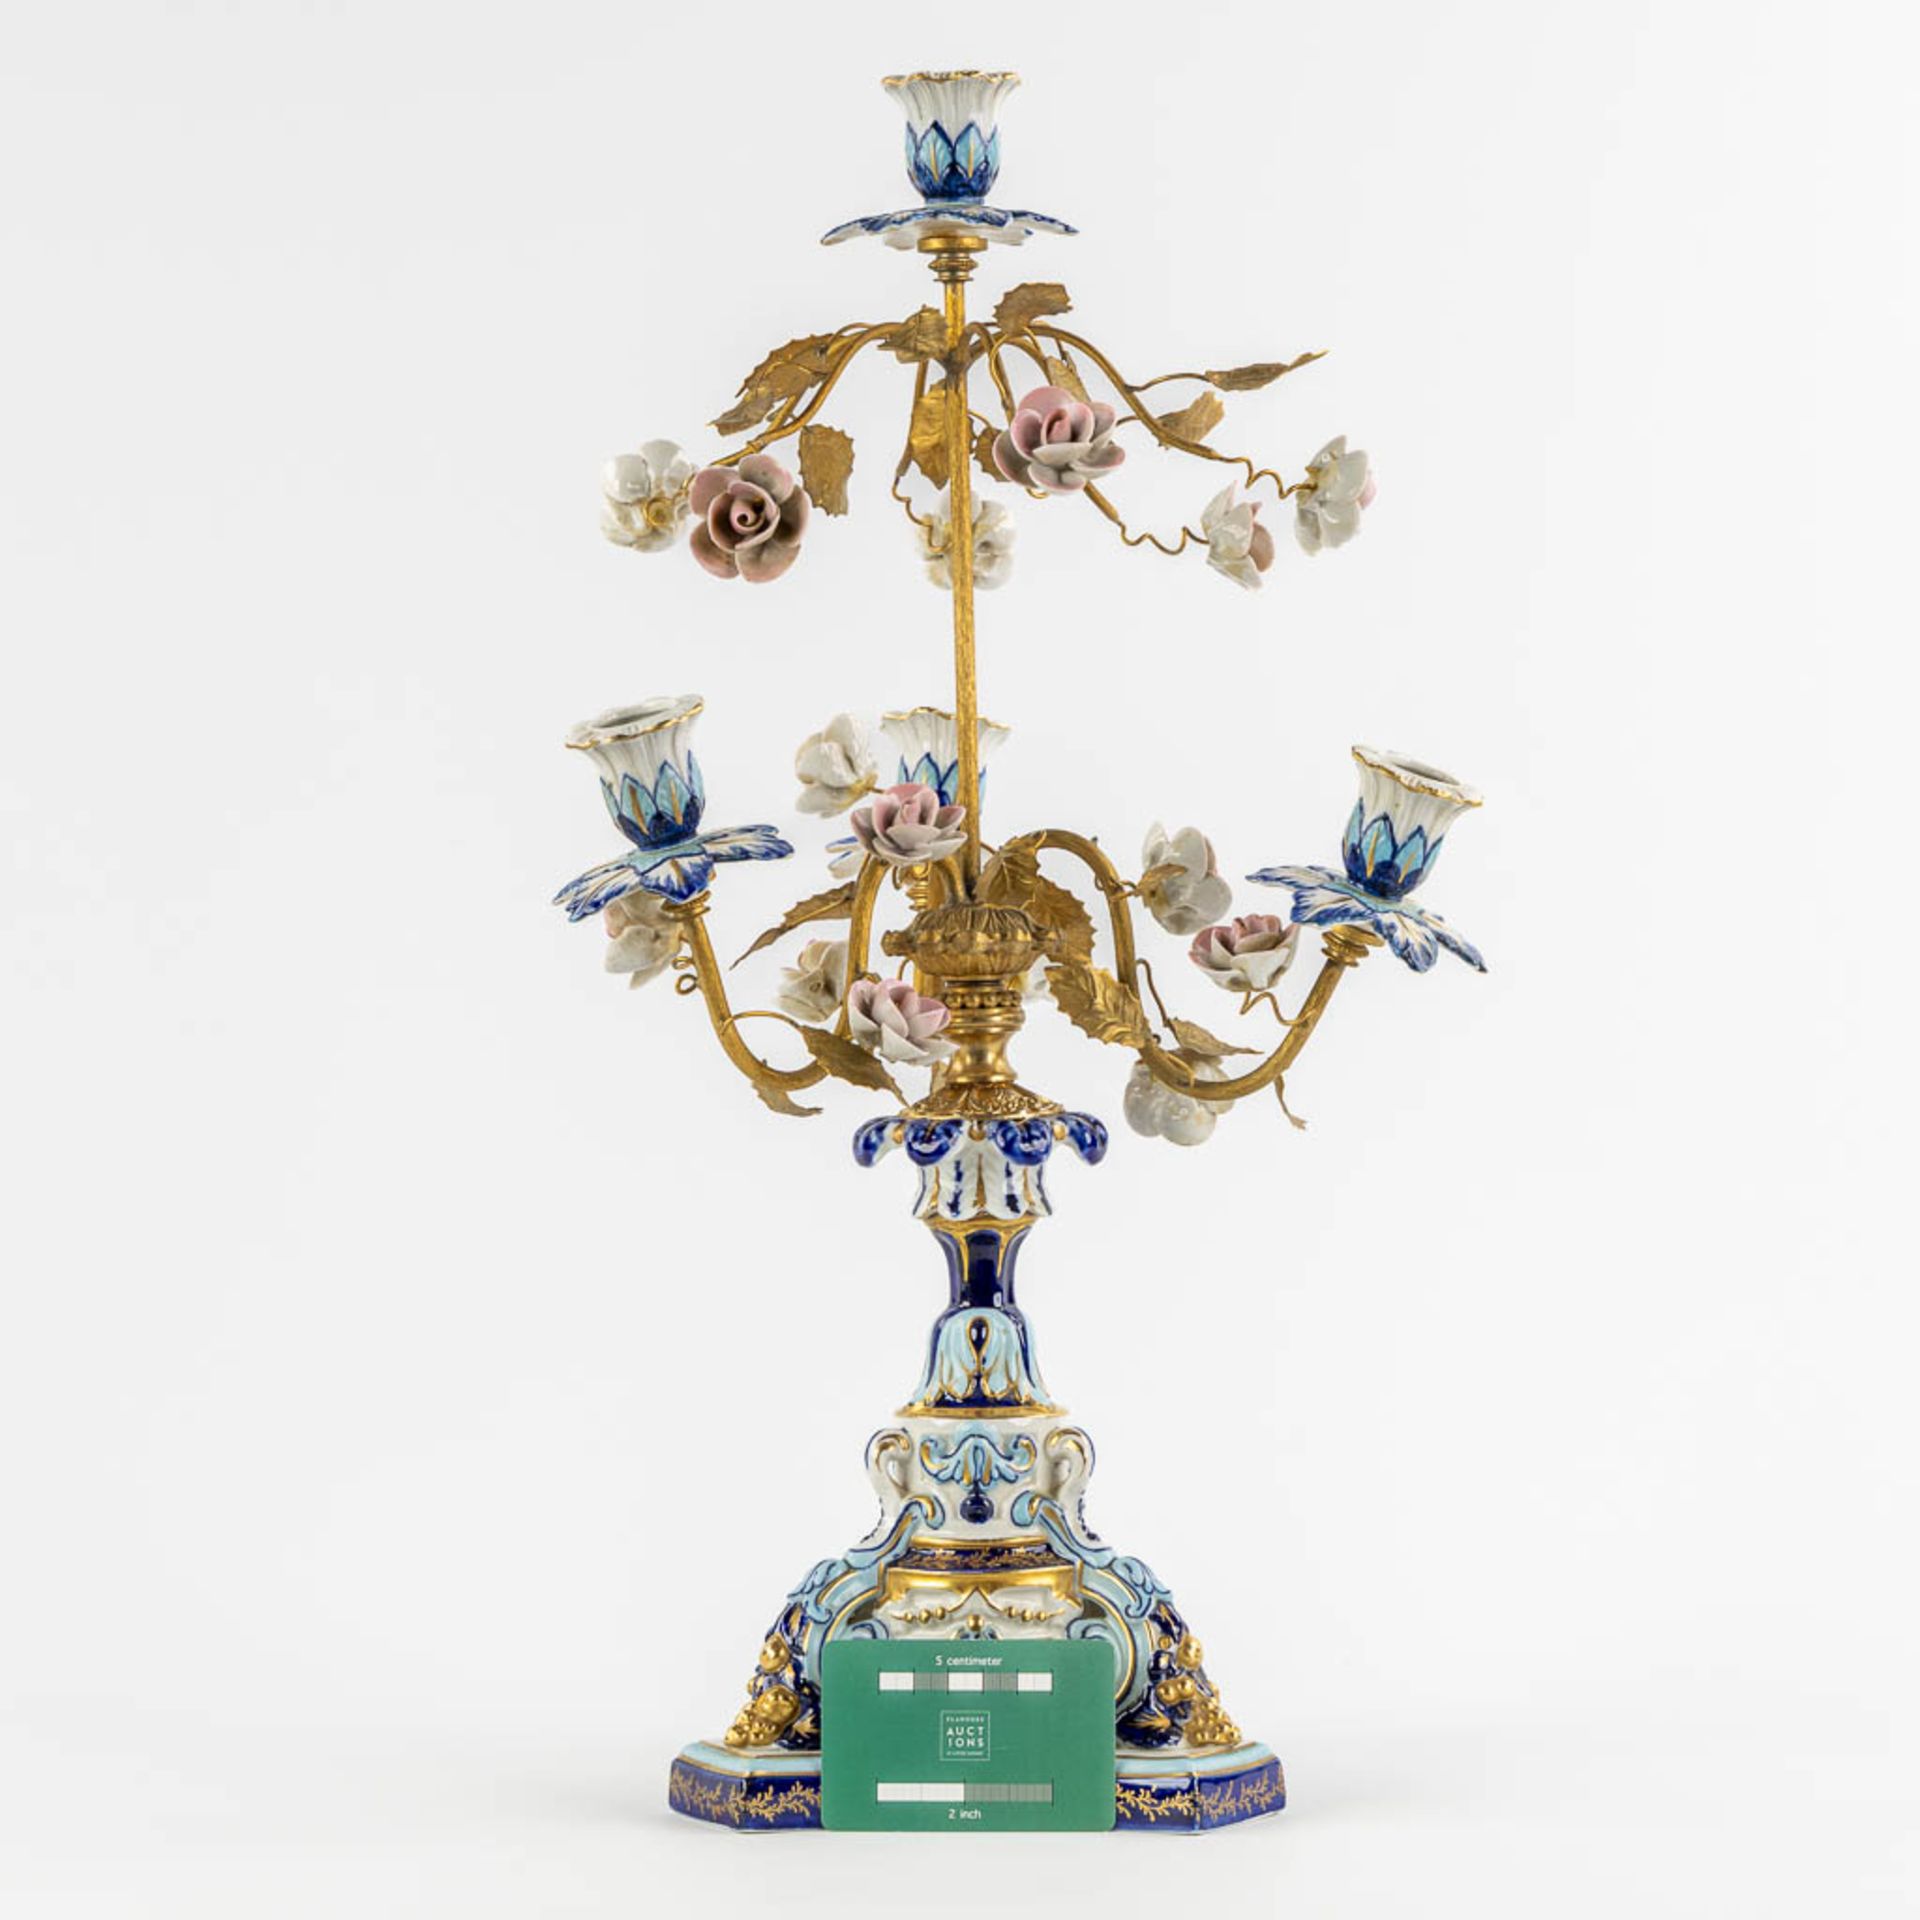 A candelabra, gilt brass and polychrome porcelain with flowers. Sèvres marks. (H:51 x D:24 cm) - Image 2 of 10